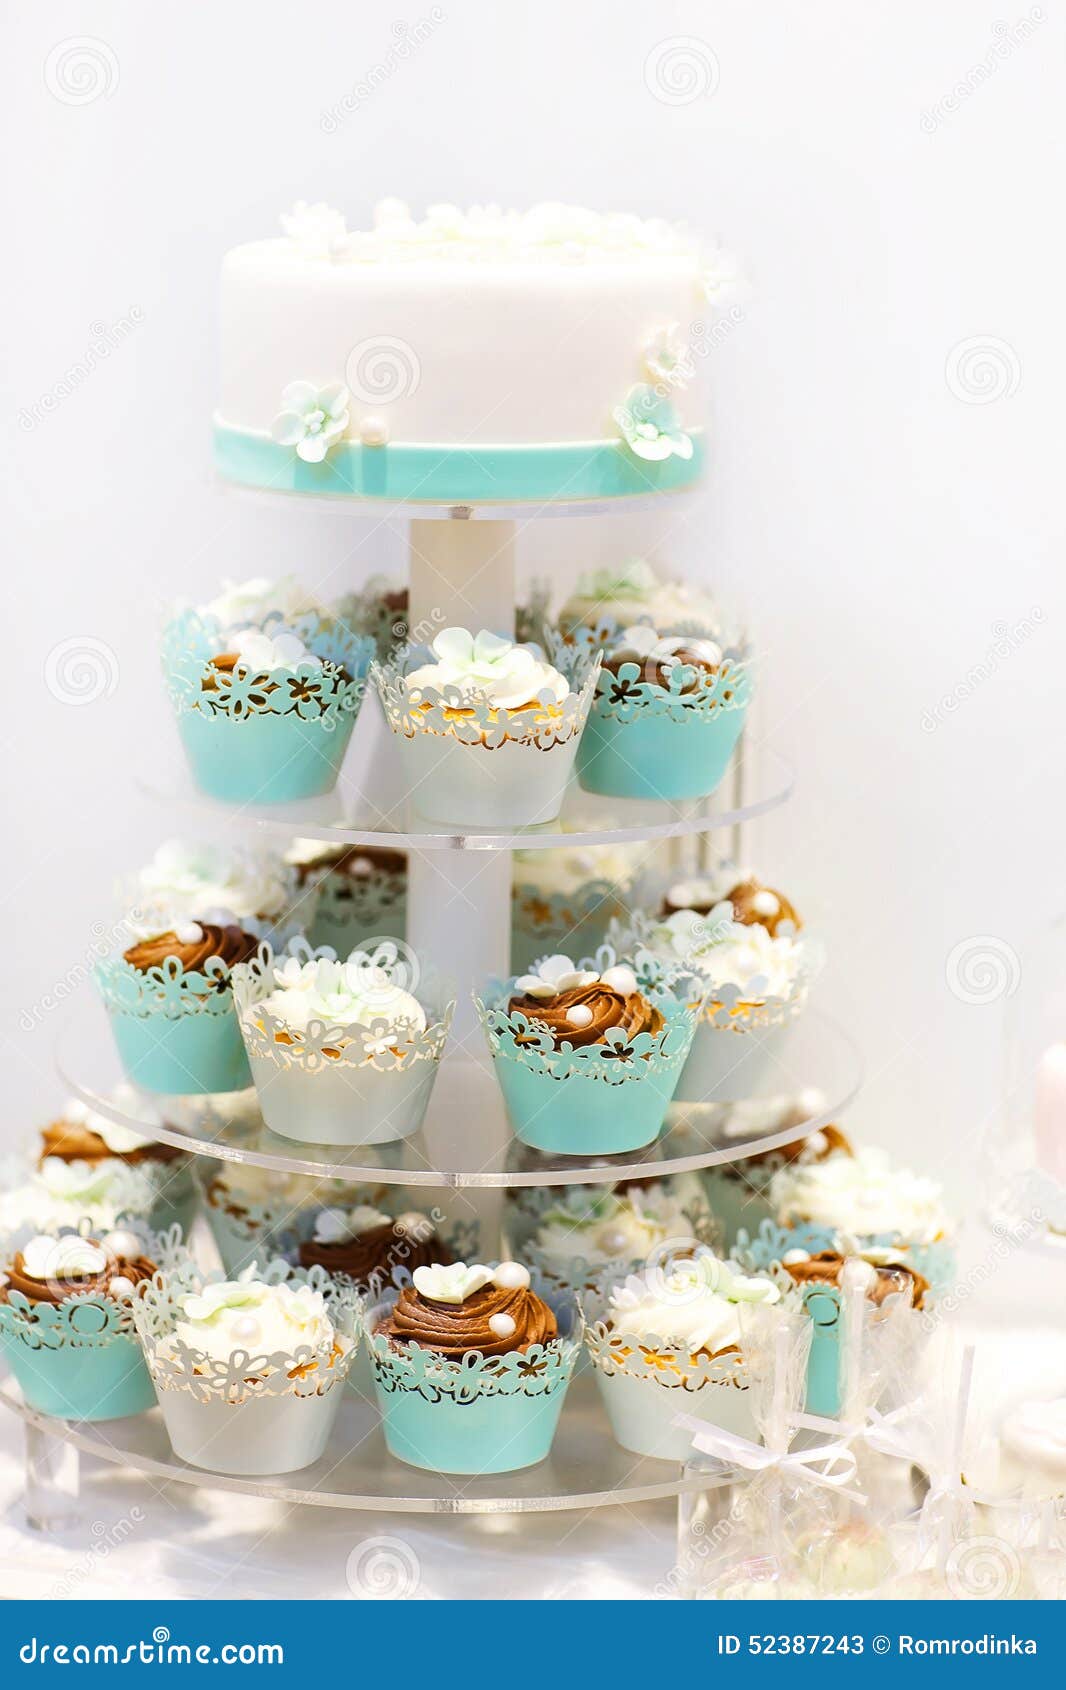 Navy And White Wedding Cake And Cupcakes - CakeCentral.com